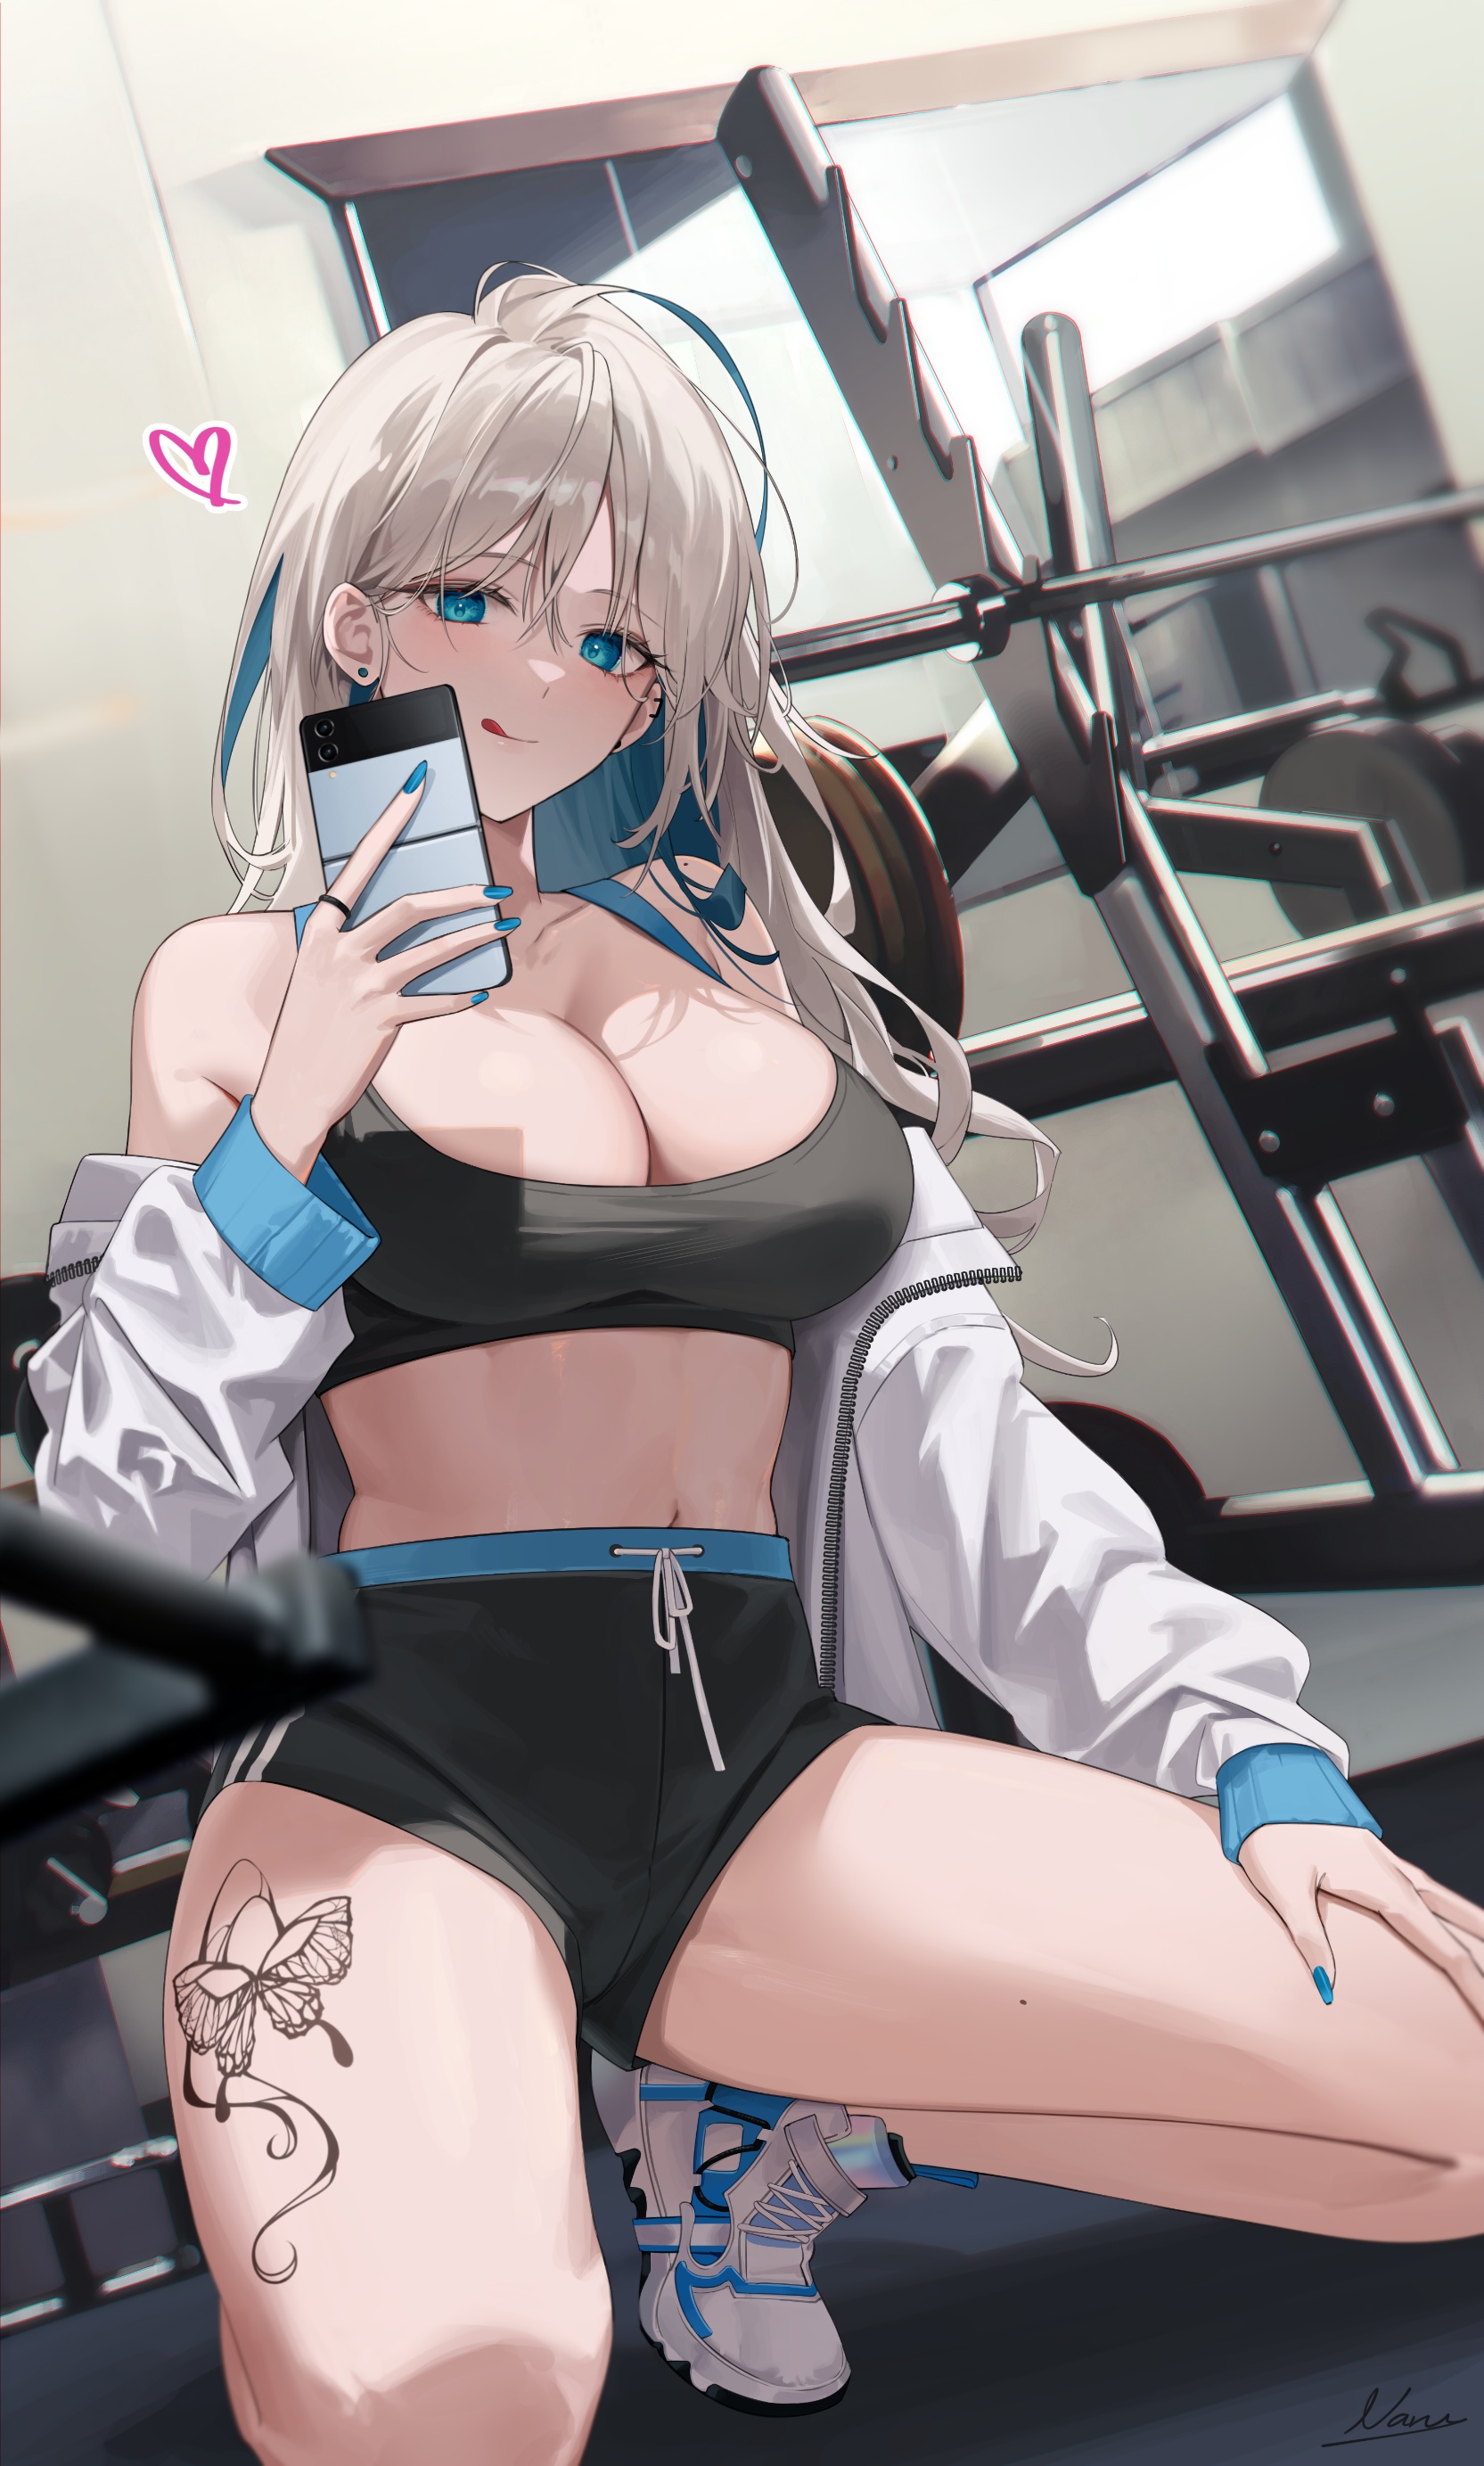 Anime 1665x2766 anime anime girls sports bra short shorts phone selfies tongue out big boobs cleavage gym equipment portrait display heart (design)